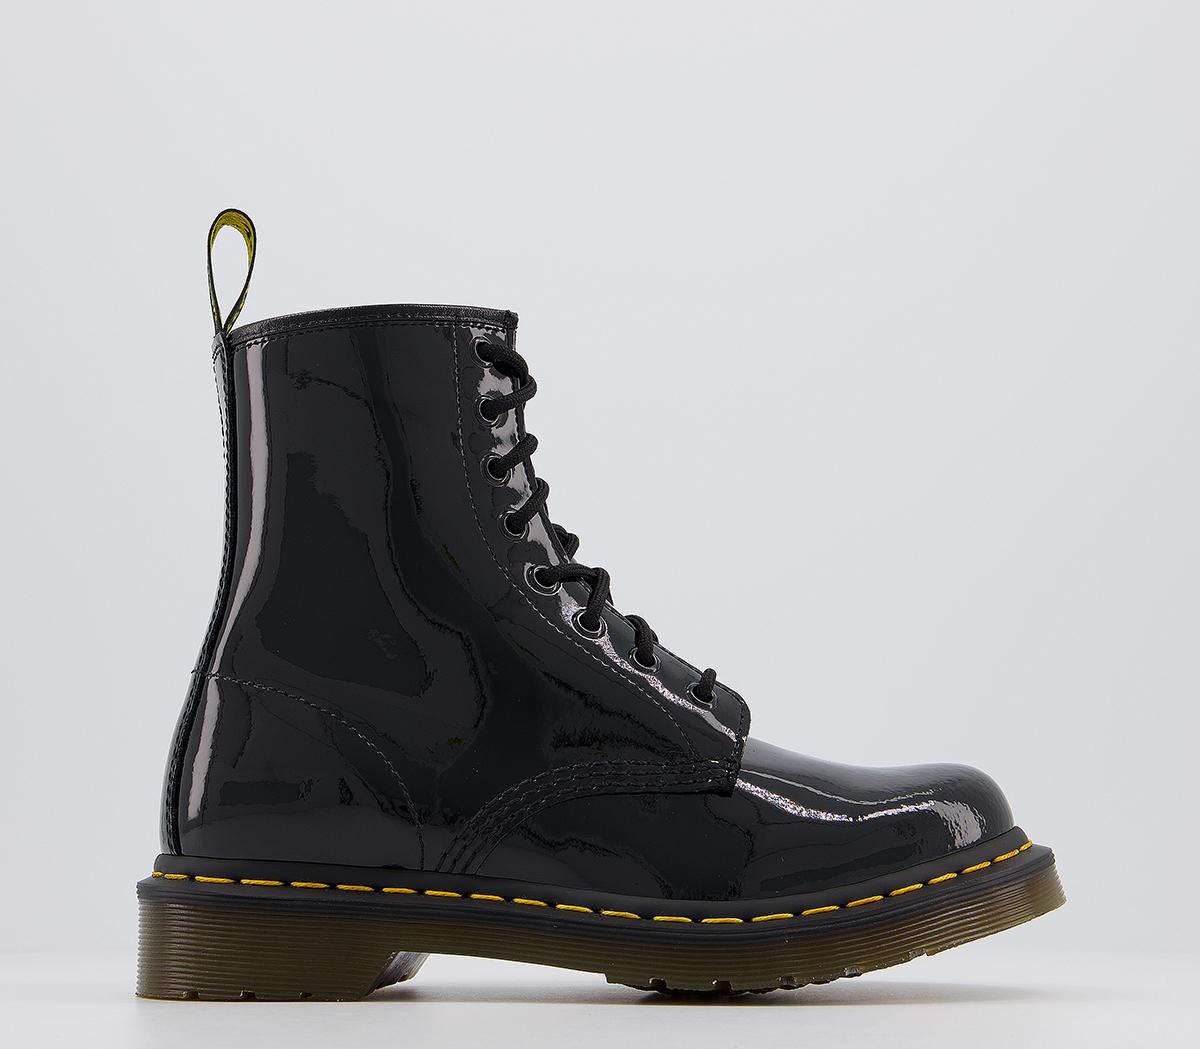 Dr. Martens 8 Eyelet Lace Up Boots Black Patent - Women's Ankle Boots